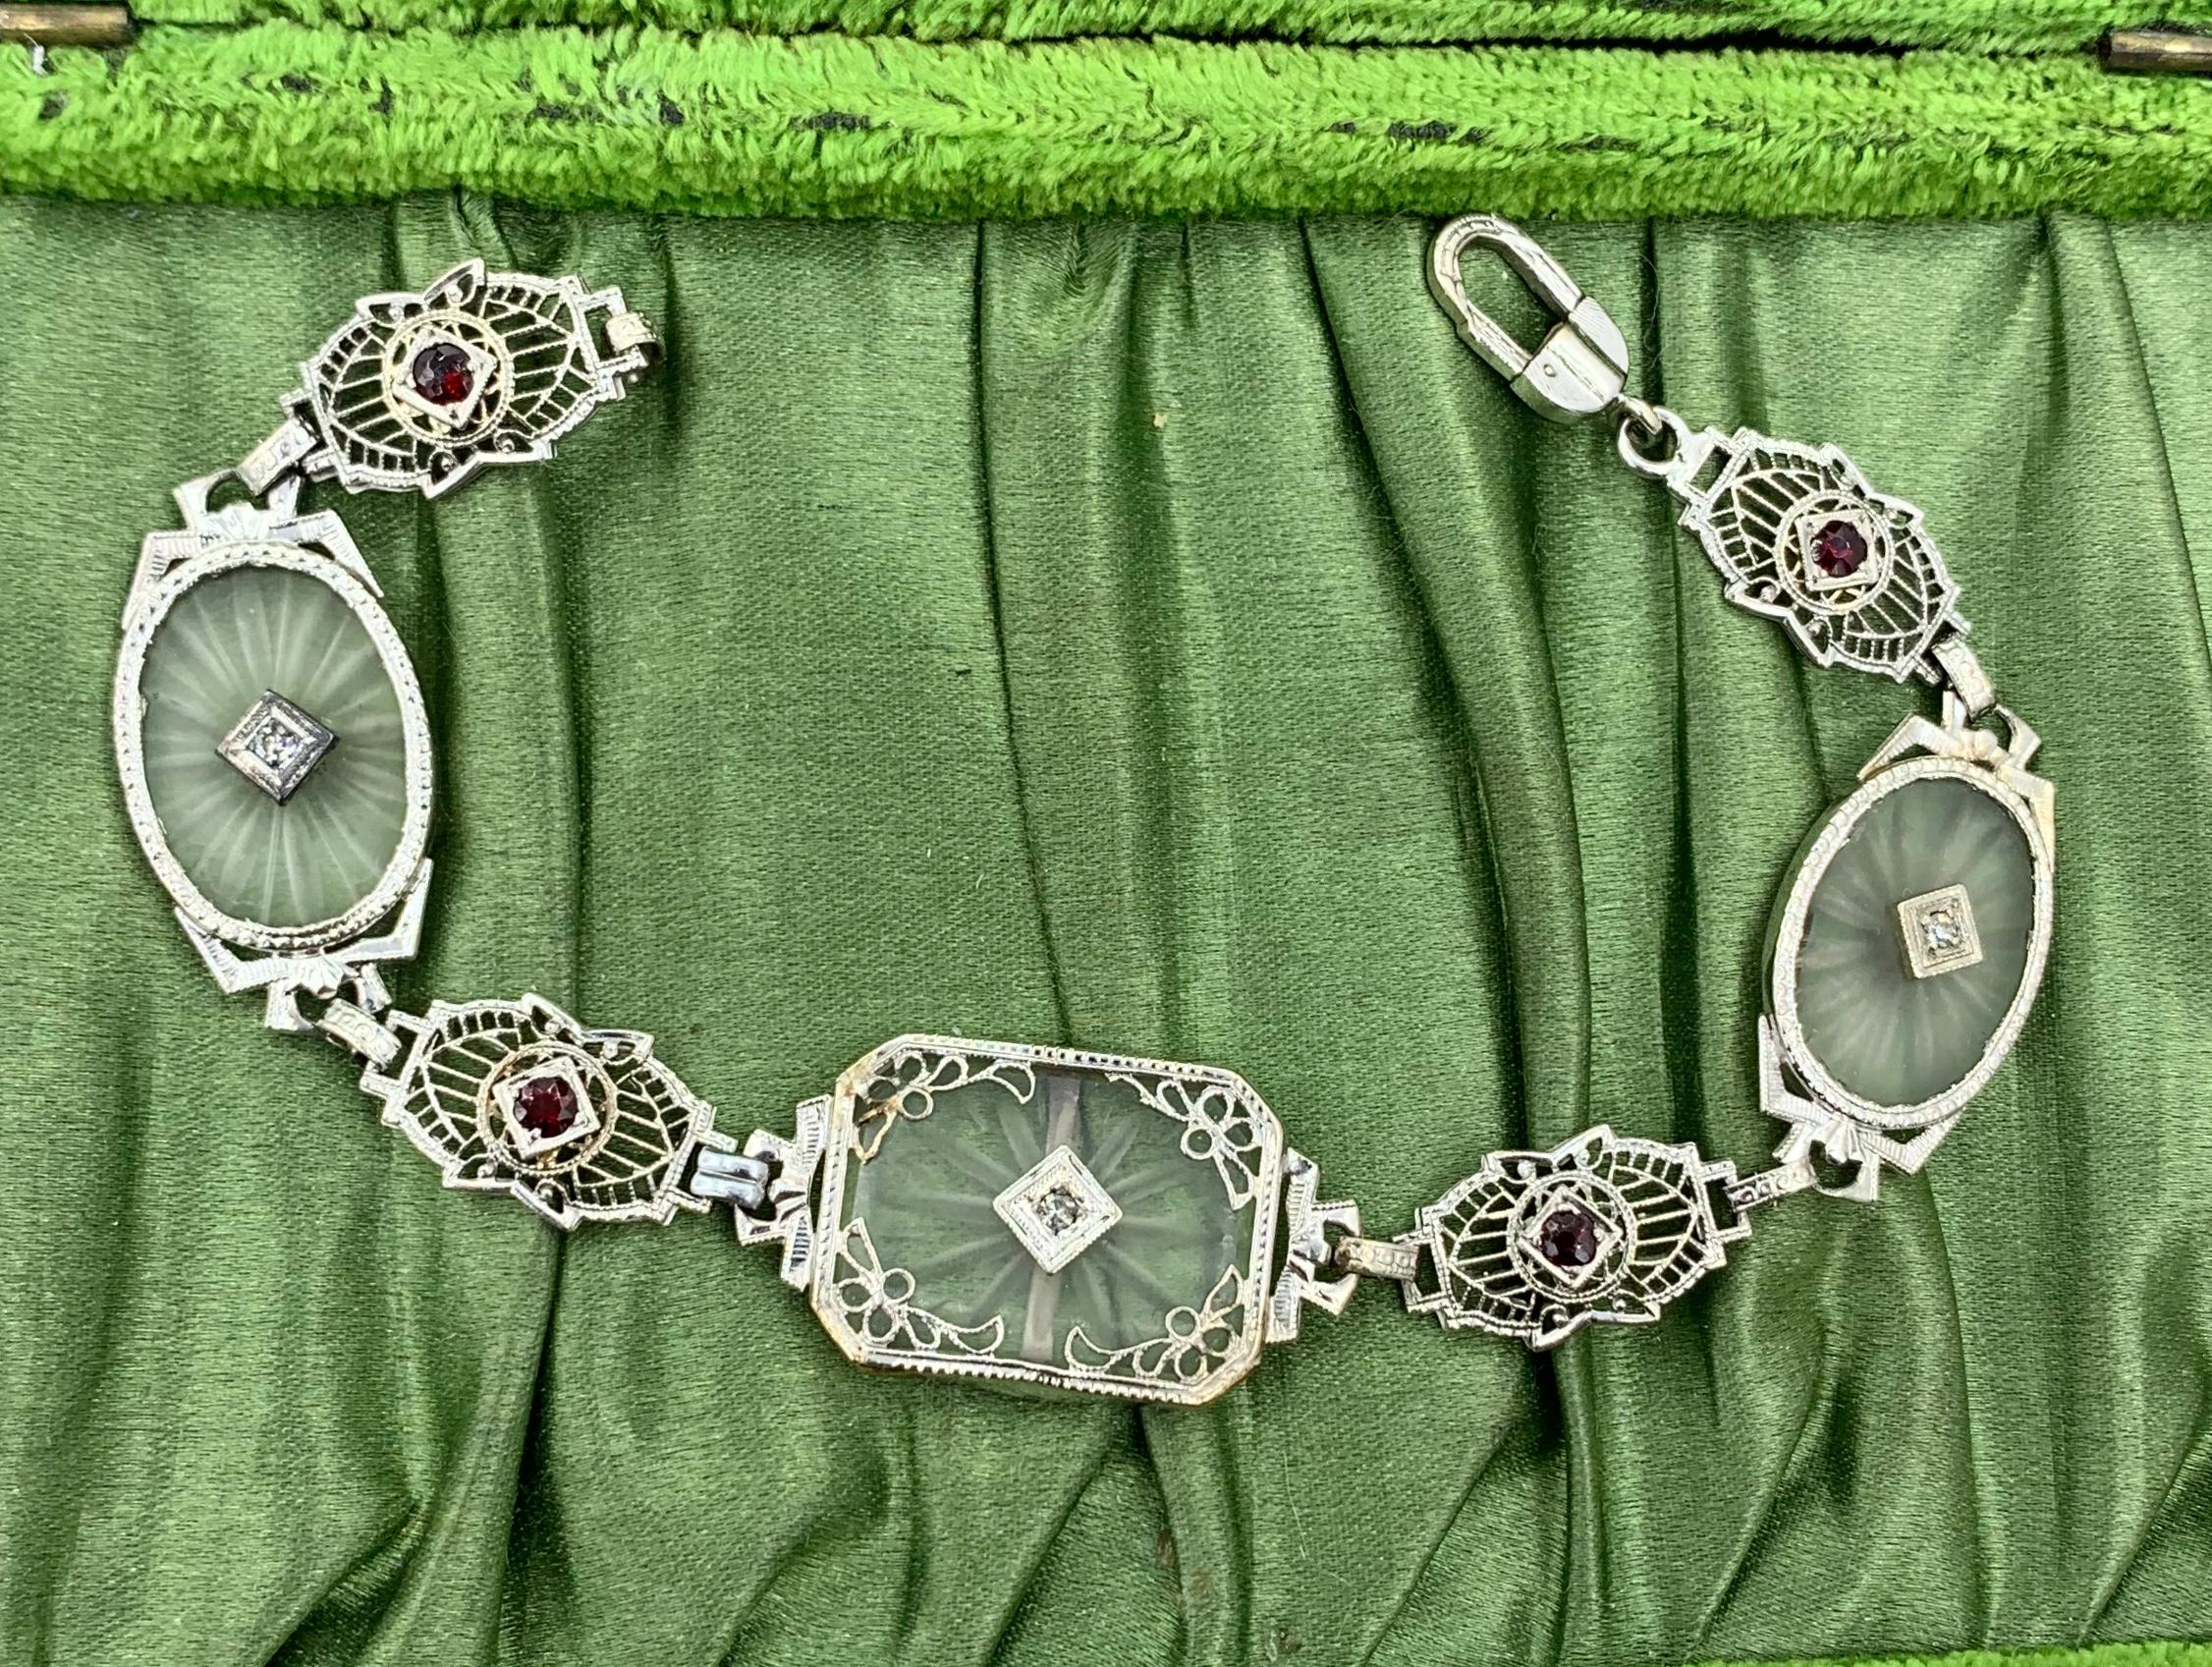 This is a radiant Diamond and Garnet Frosted Rock Quartz Crystal 14 Karat White Gold Bracelet.  The classic antique Art Deco bracelet of great beauty is set with rectangular and oval carved Rock Crystal plaques (also known as camphor glass).  The